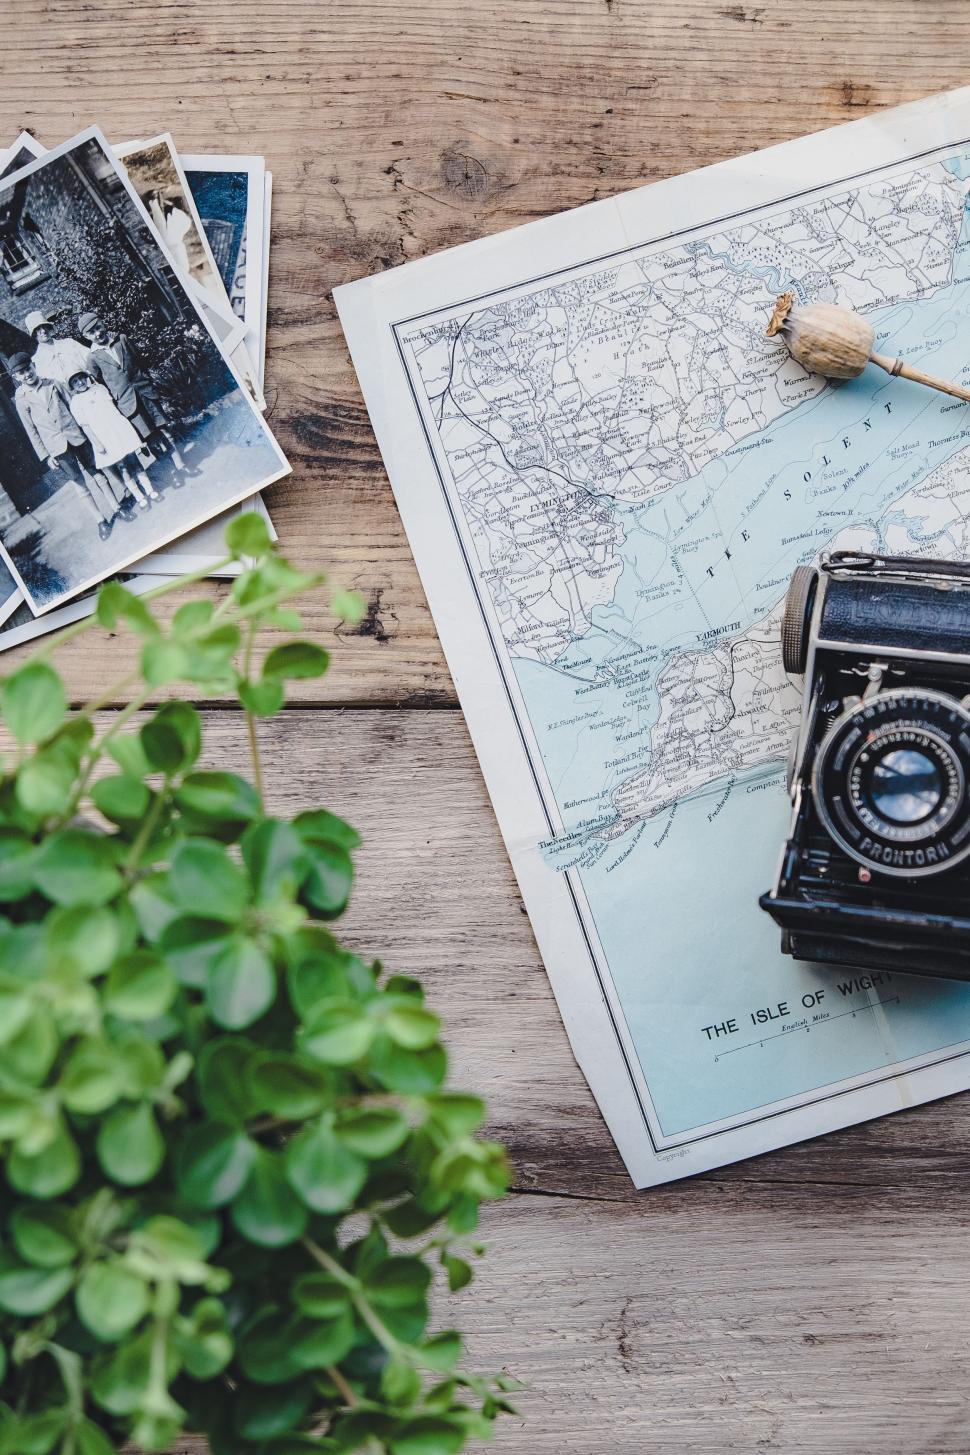 Free Image of Vintage Camera on Map Beside Potted Plant 